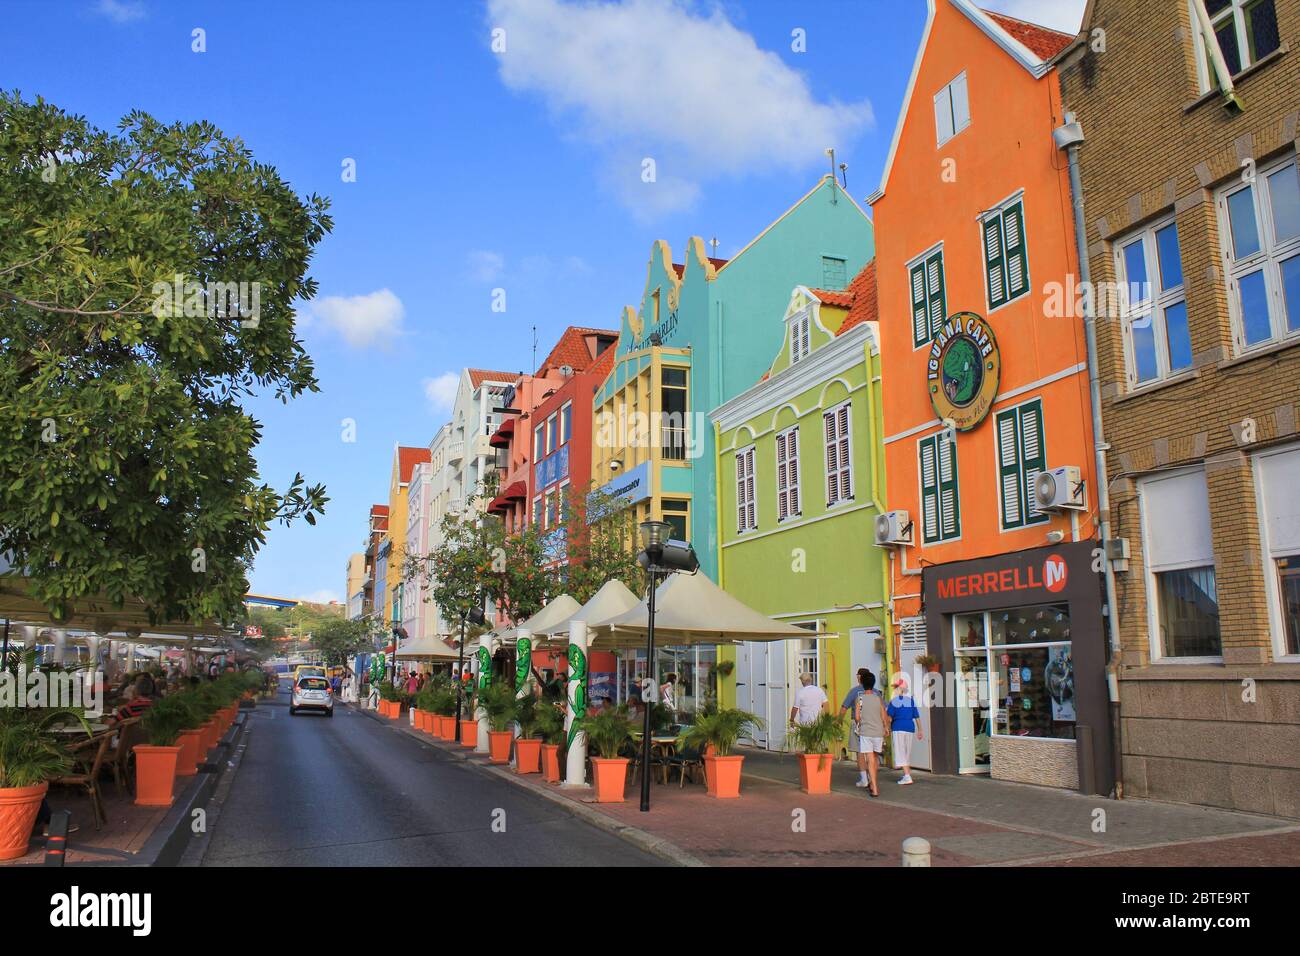 WILLEMSTAD, CURACAO - FEBRUARY 11, 2014: Colorful houses in Willemstad, Caribbean. The city center is UNESCO World Heritage Site. Stock Photo